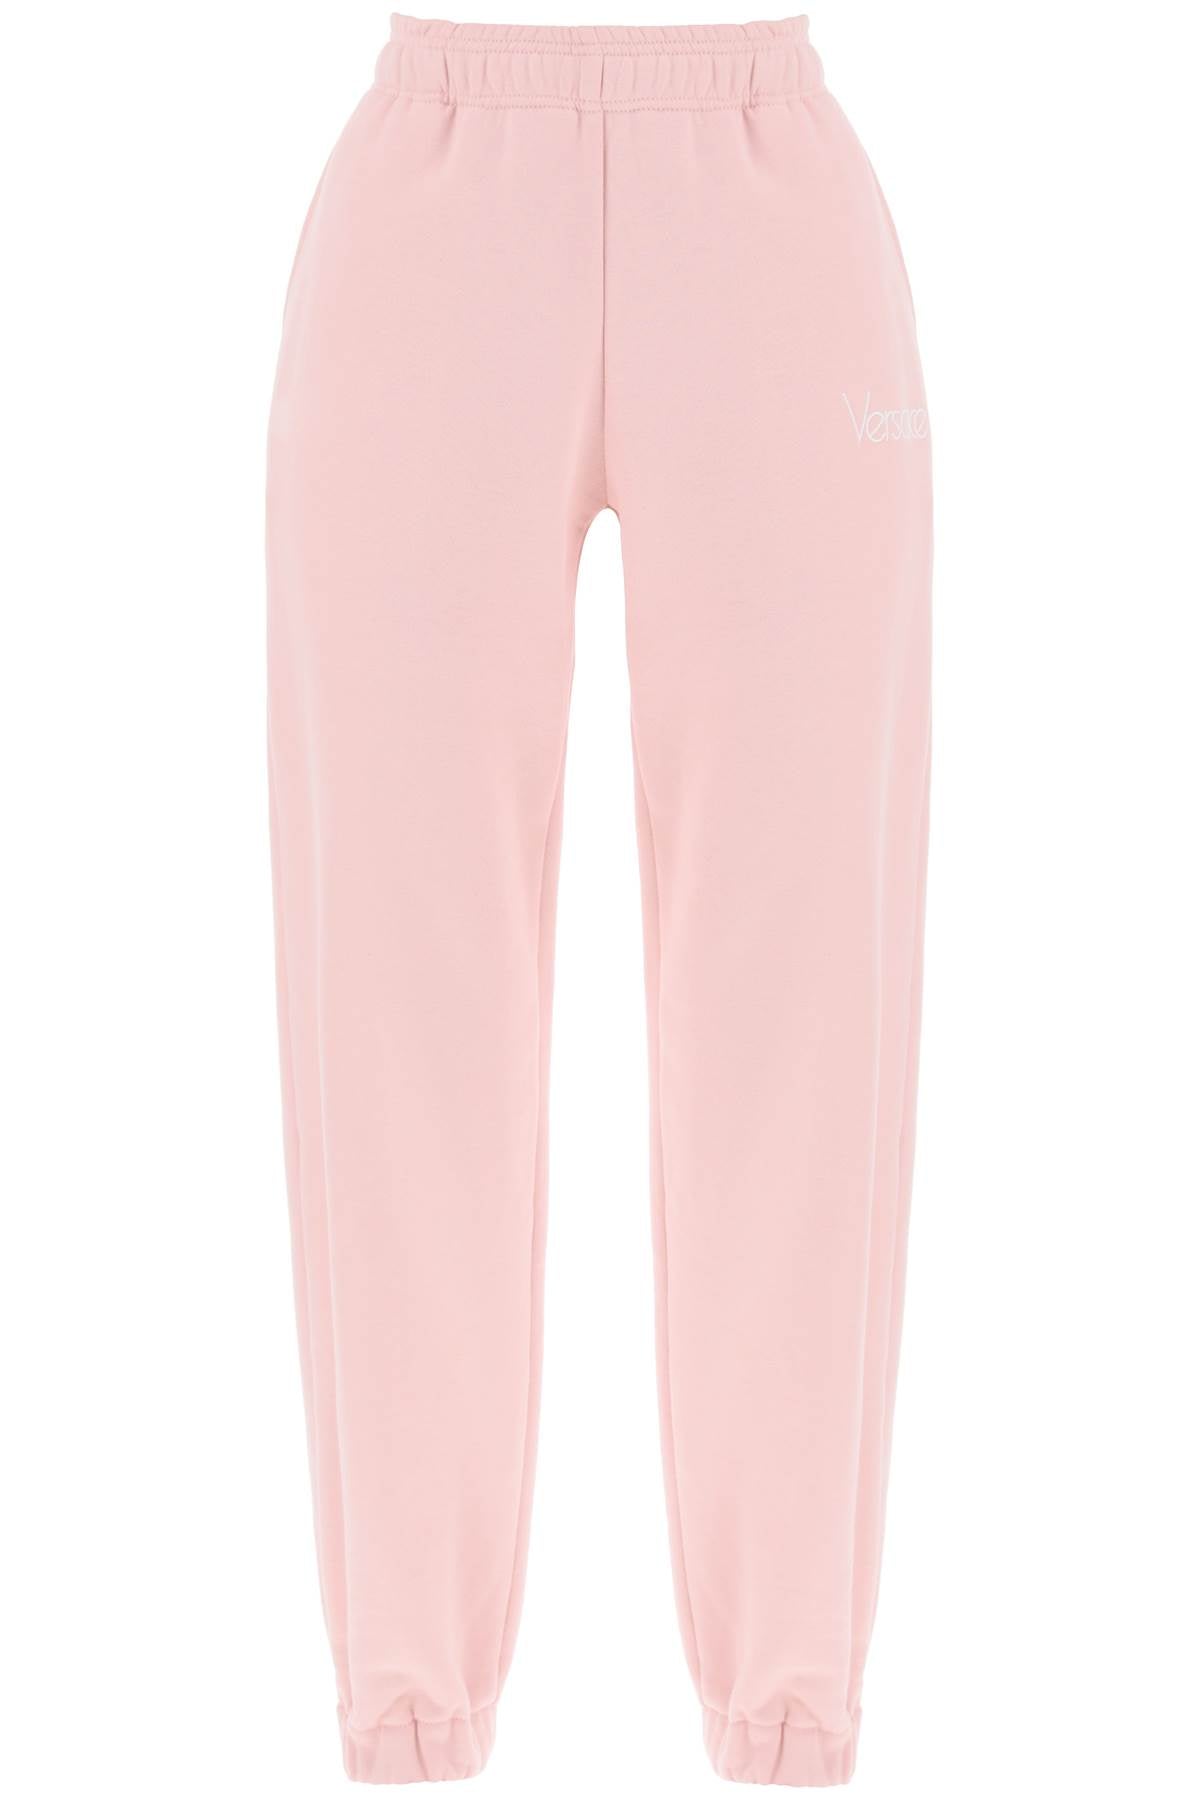 Versace 1978 re-edition joggers 1014298 1A10157 PINK WHITE